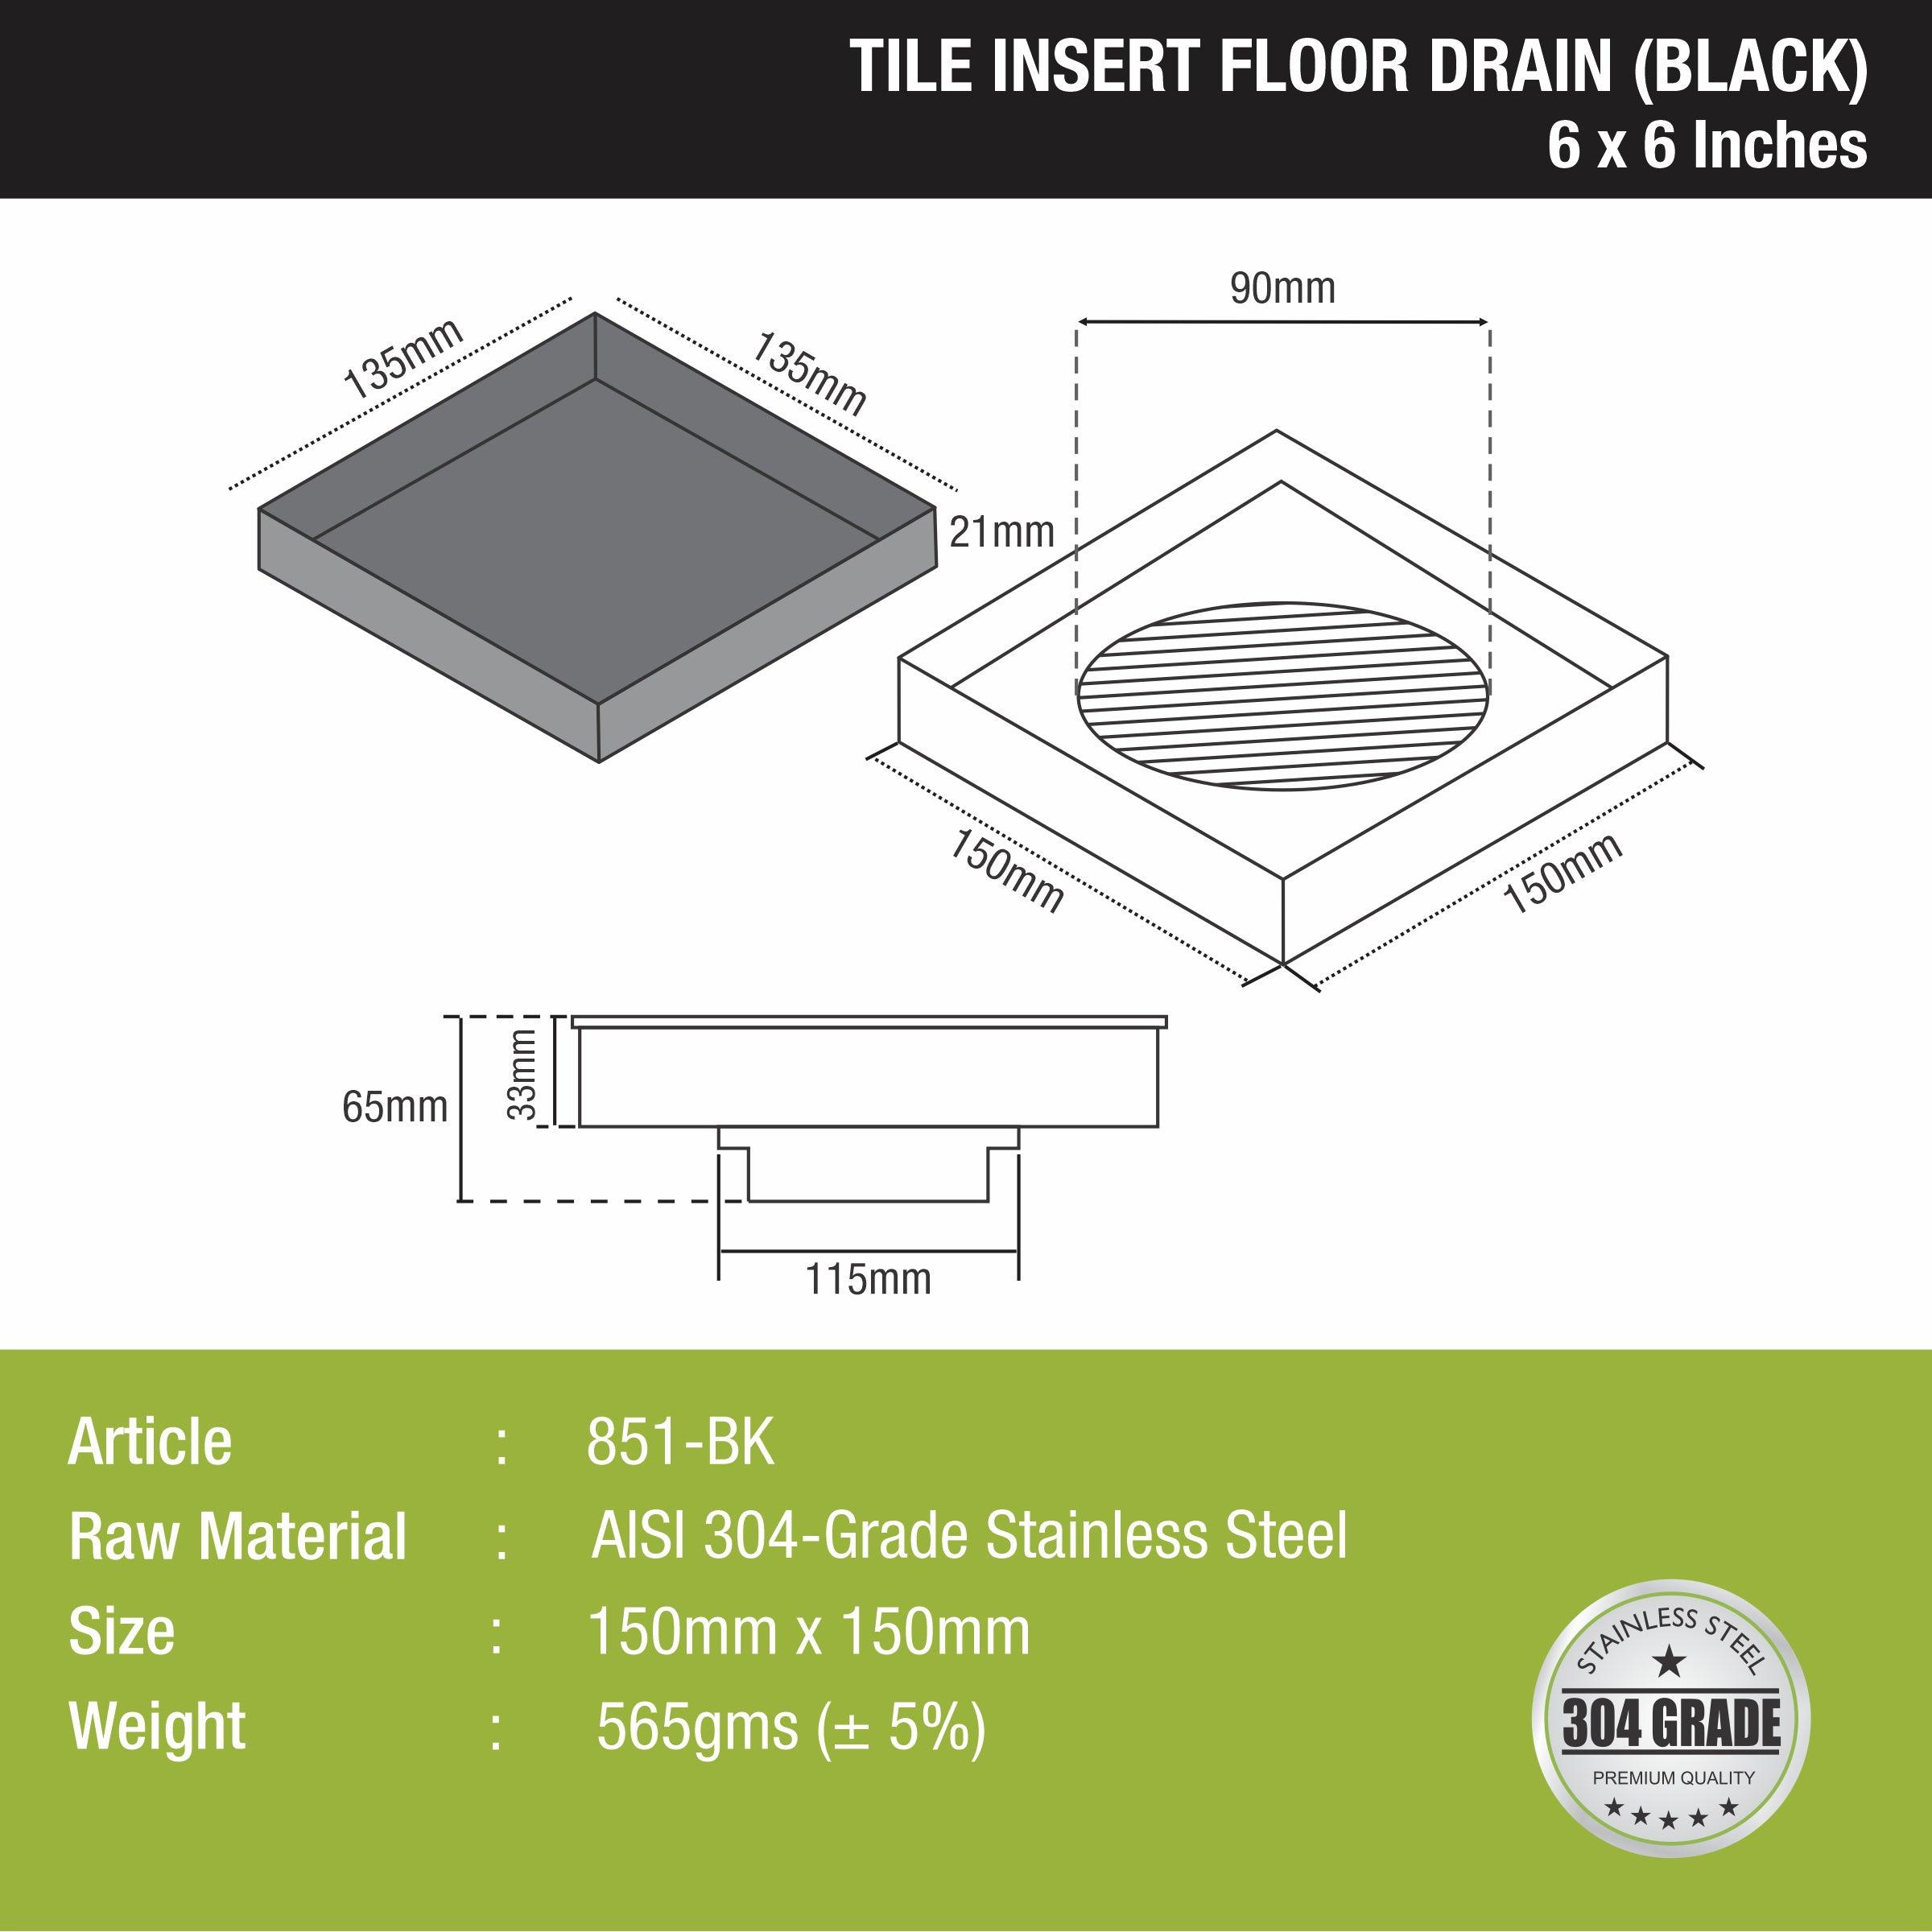 Tile Insert Square Floor Drain - Black (6 x 6 Inches)  size and measurement